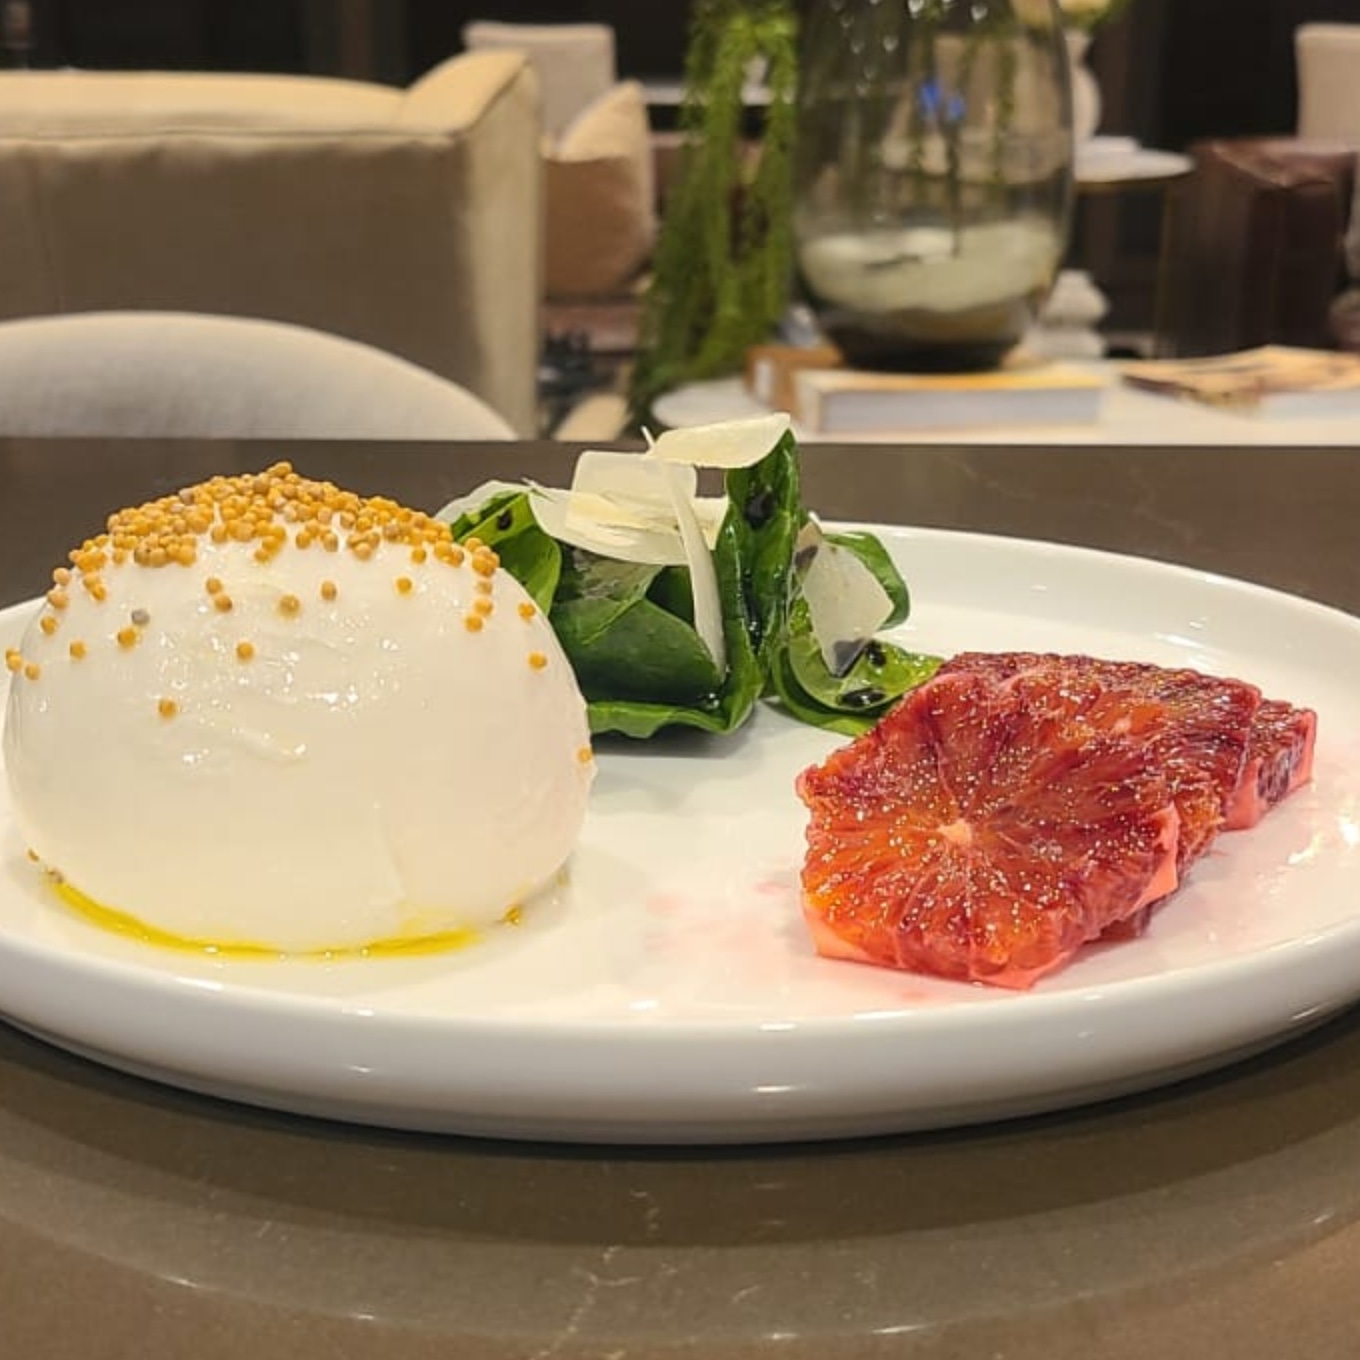 Burrata, blood orange, young spinach leaves from Epicureans of Florida - Private chef fort Lauderdale | Private chef Miami | Luxury Catering Miami | Private catering Fort Lauderdale | Personal chef Miami | Private chef near me | Home chef